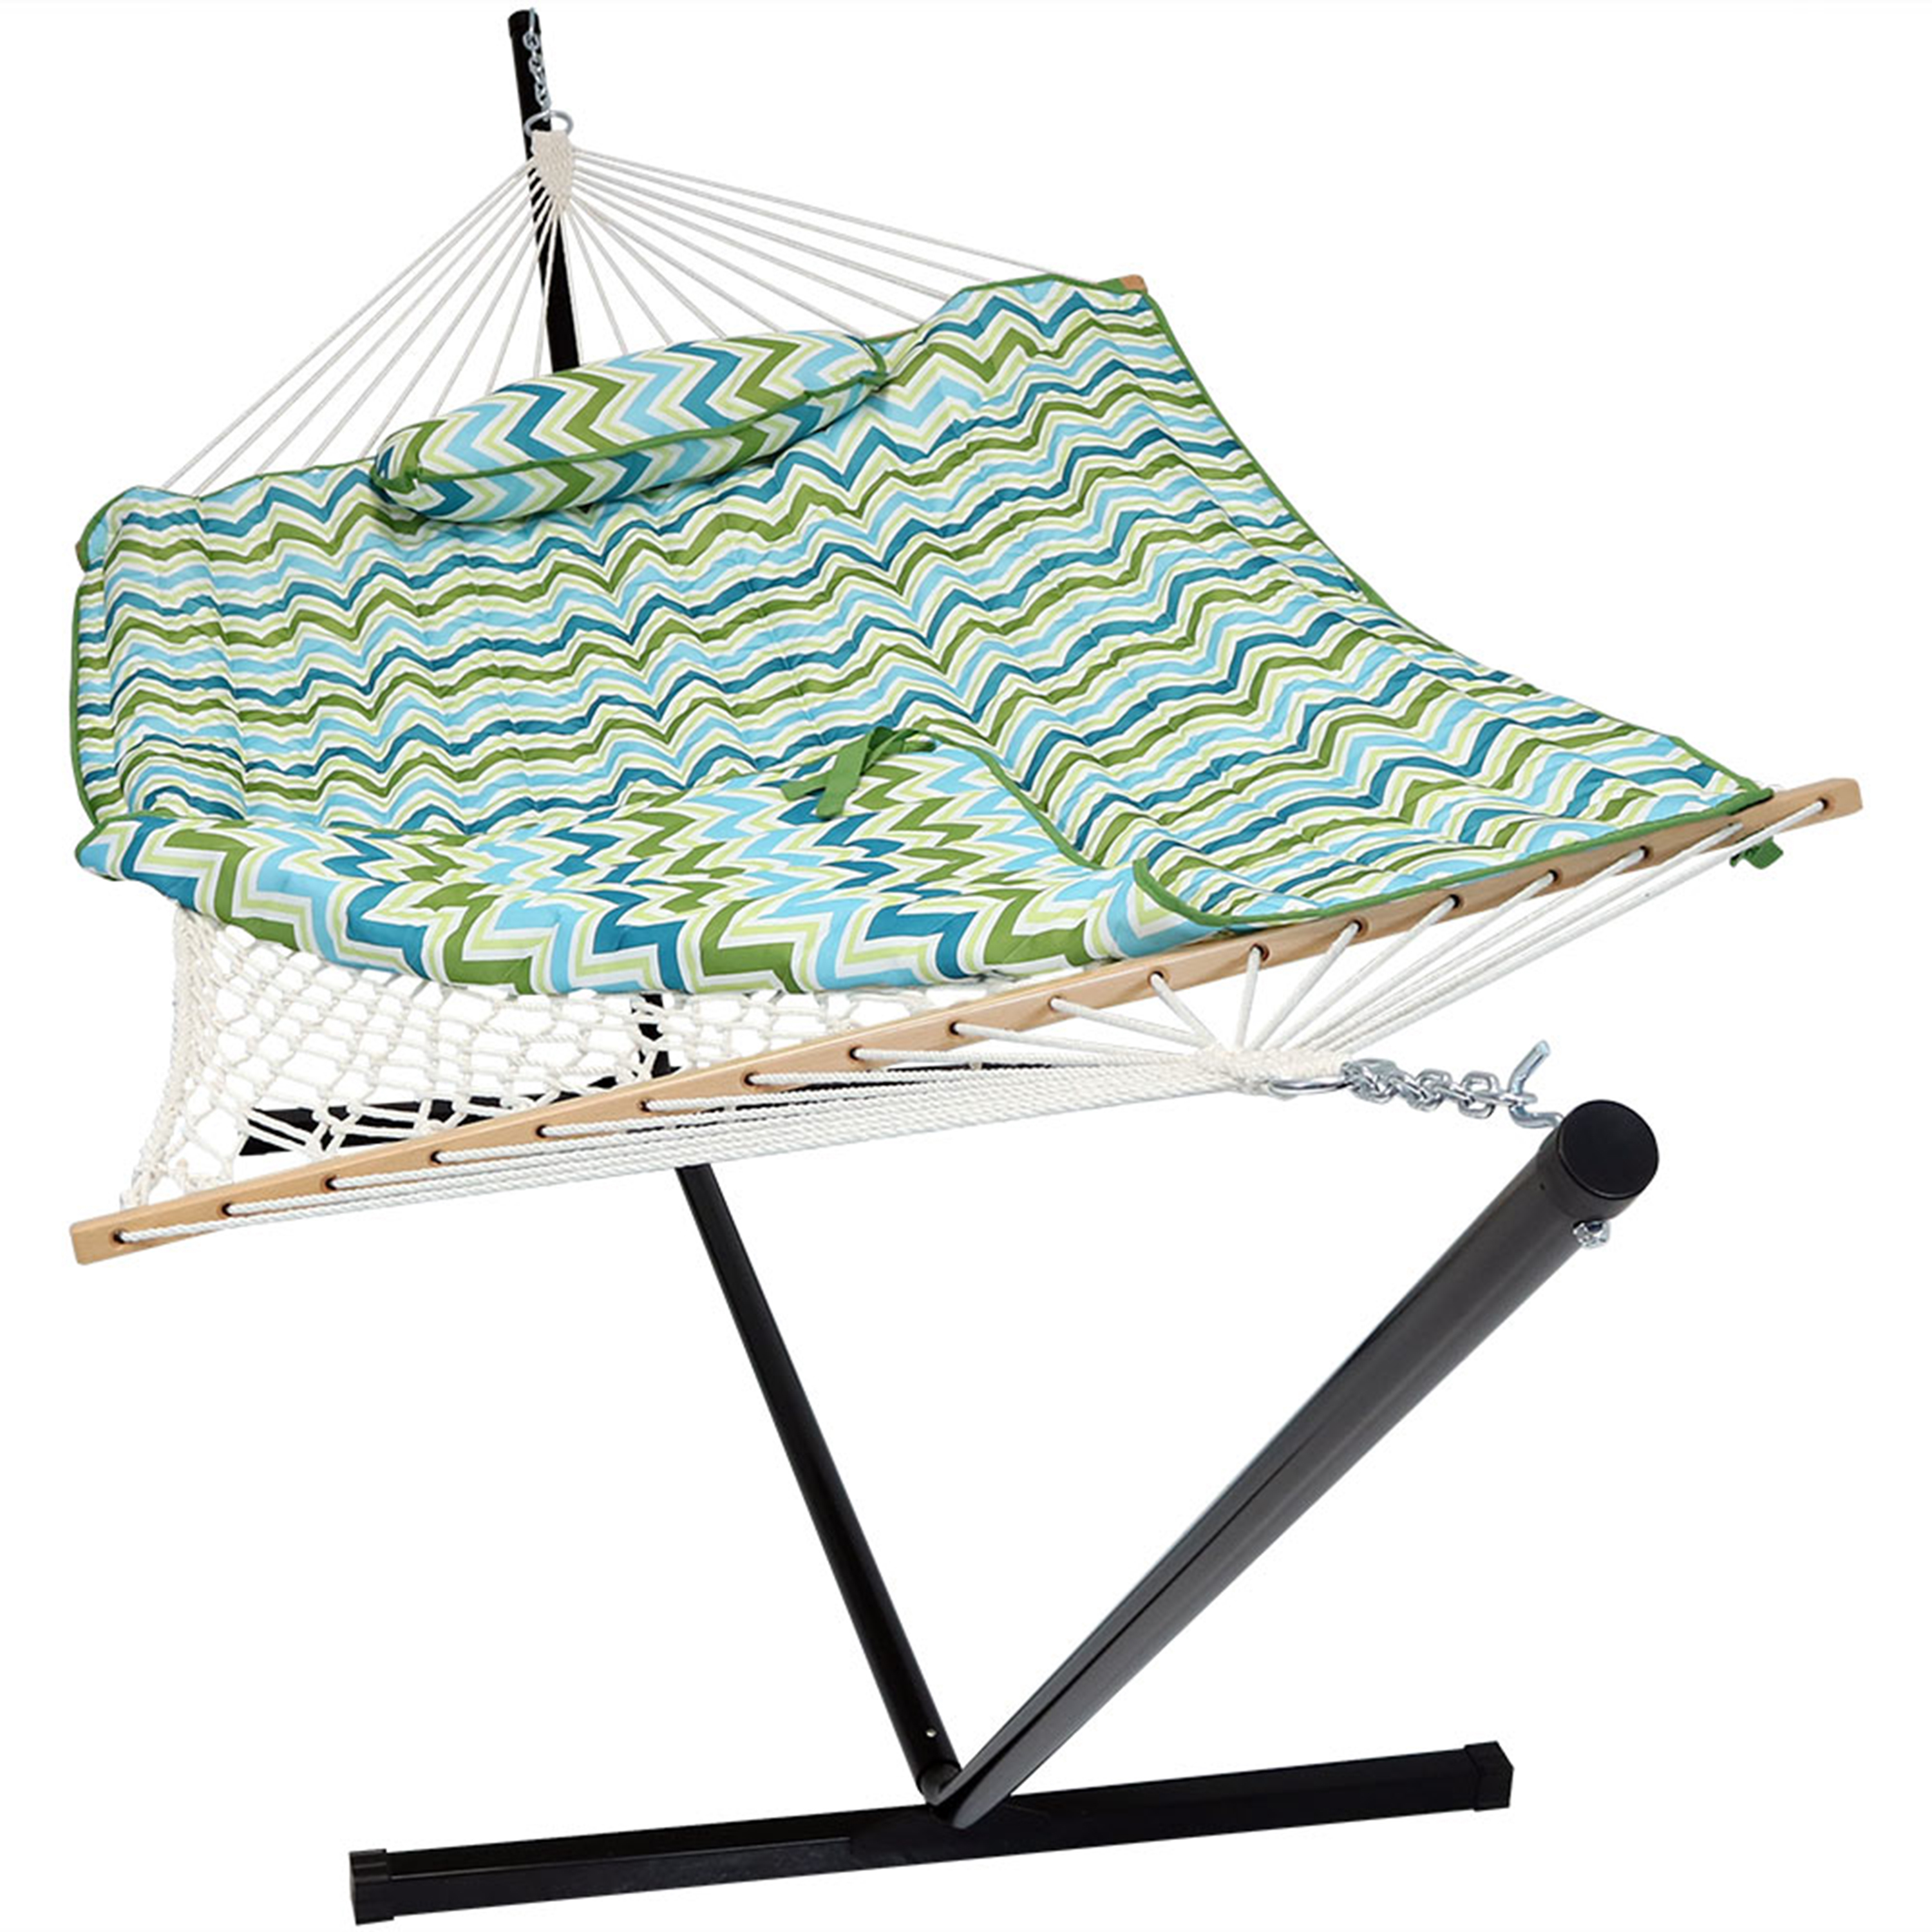 Sunnydaze Cotton Rope Hammock with 12 Foot Steel Stand, Pad and Pillow, 275 Pound Capacity, Blue &amp; Green Chevron